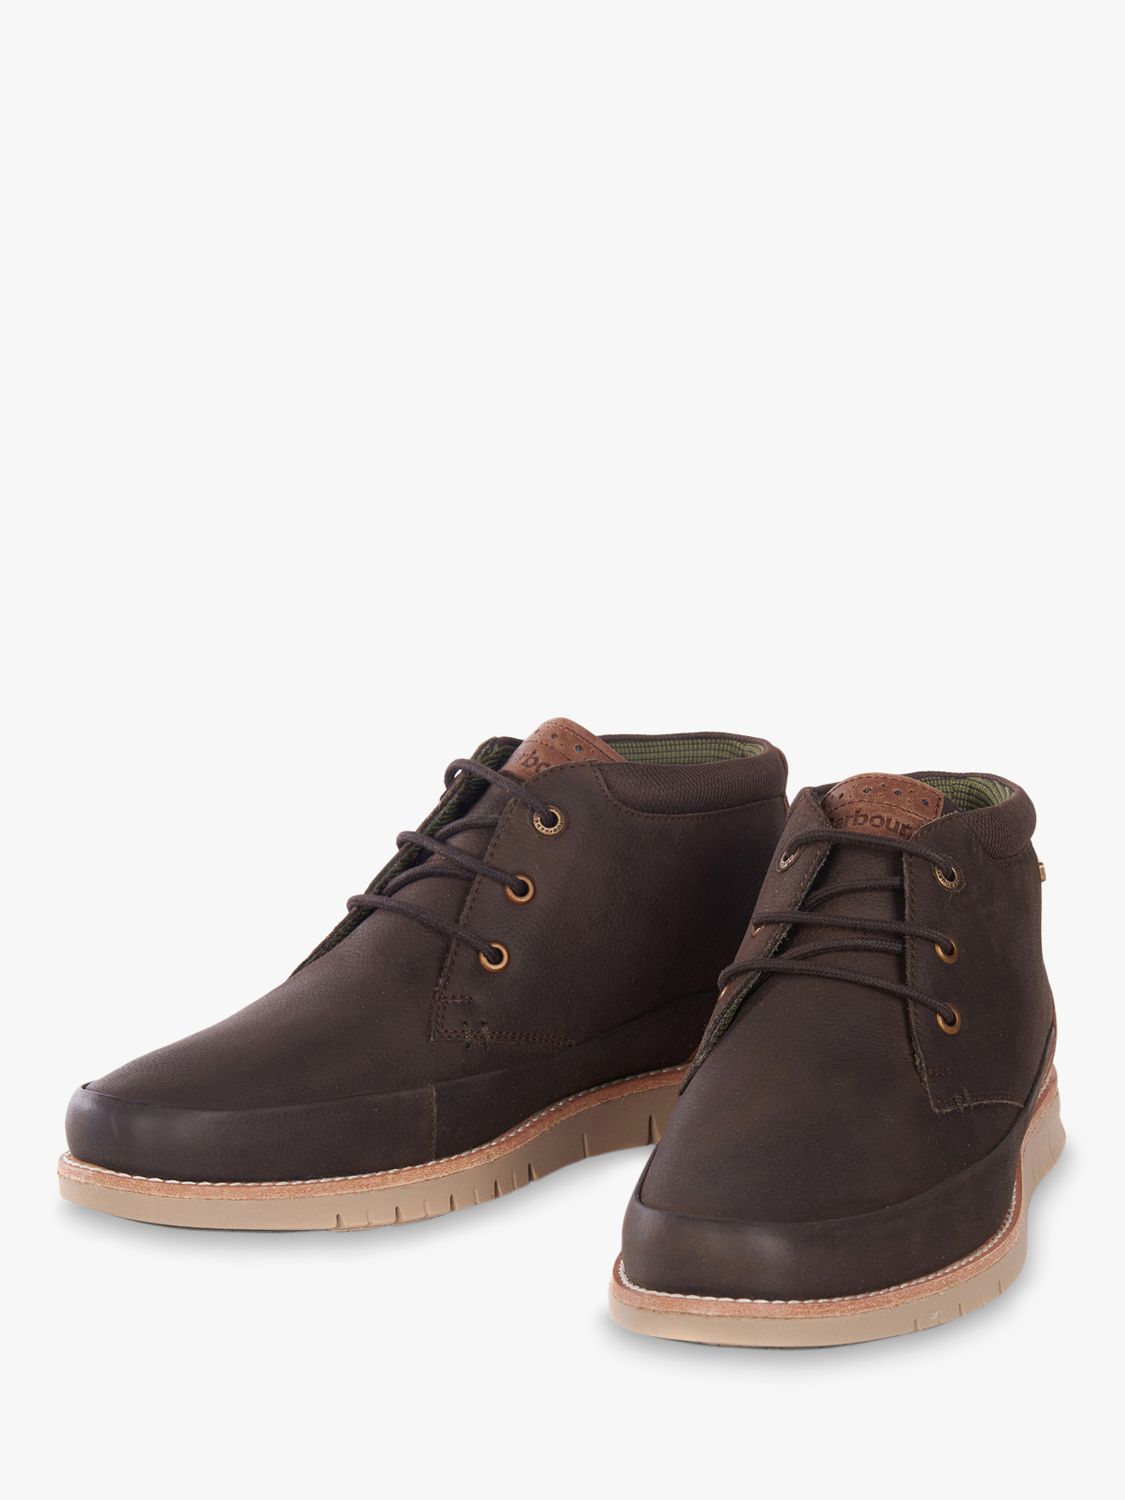 barbour nelson shoes